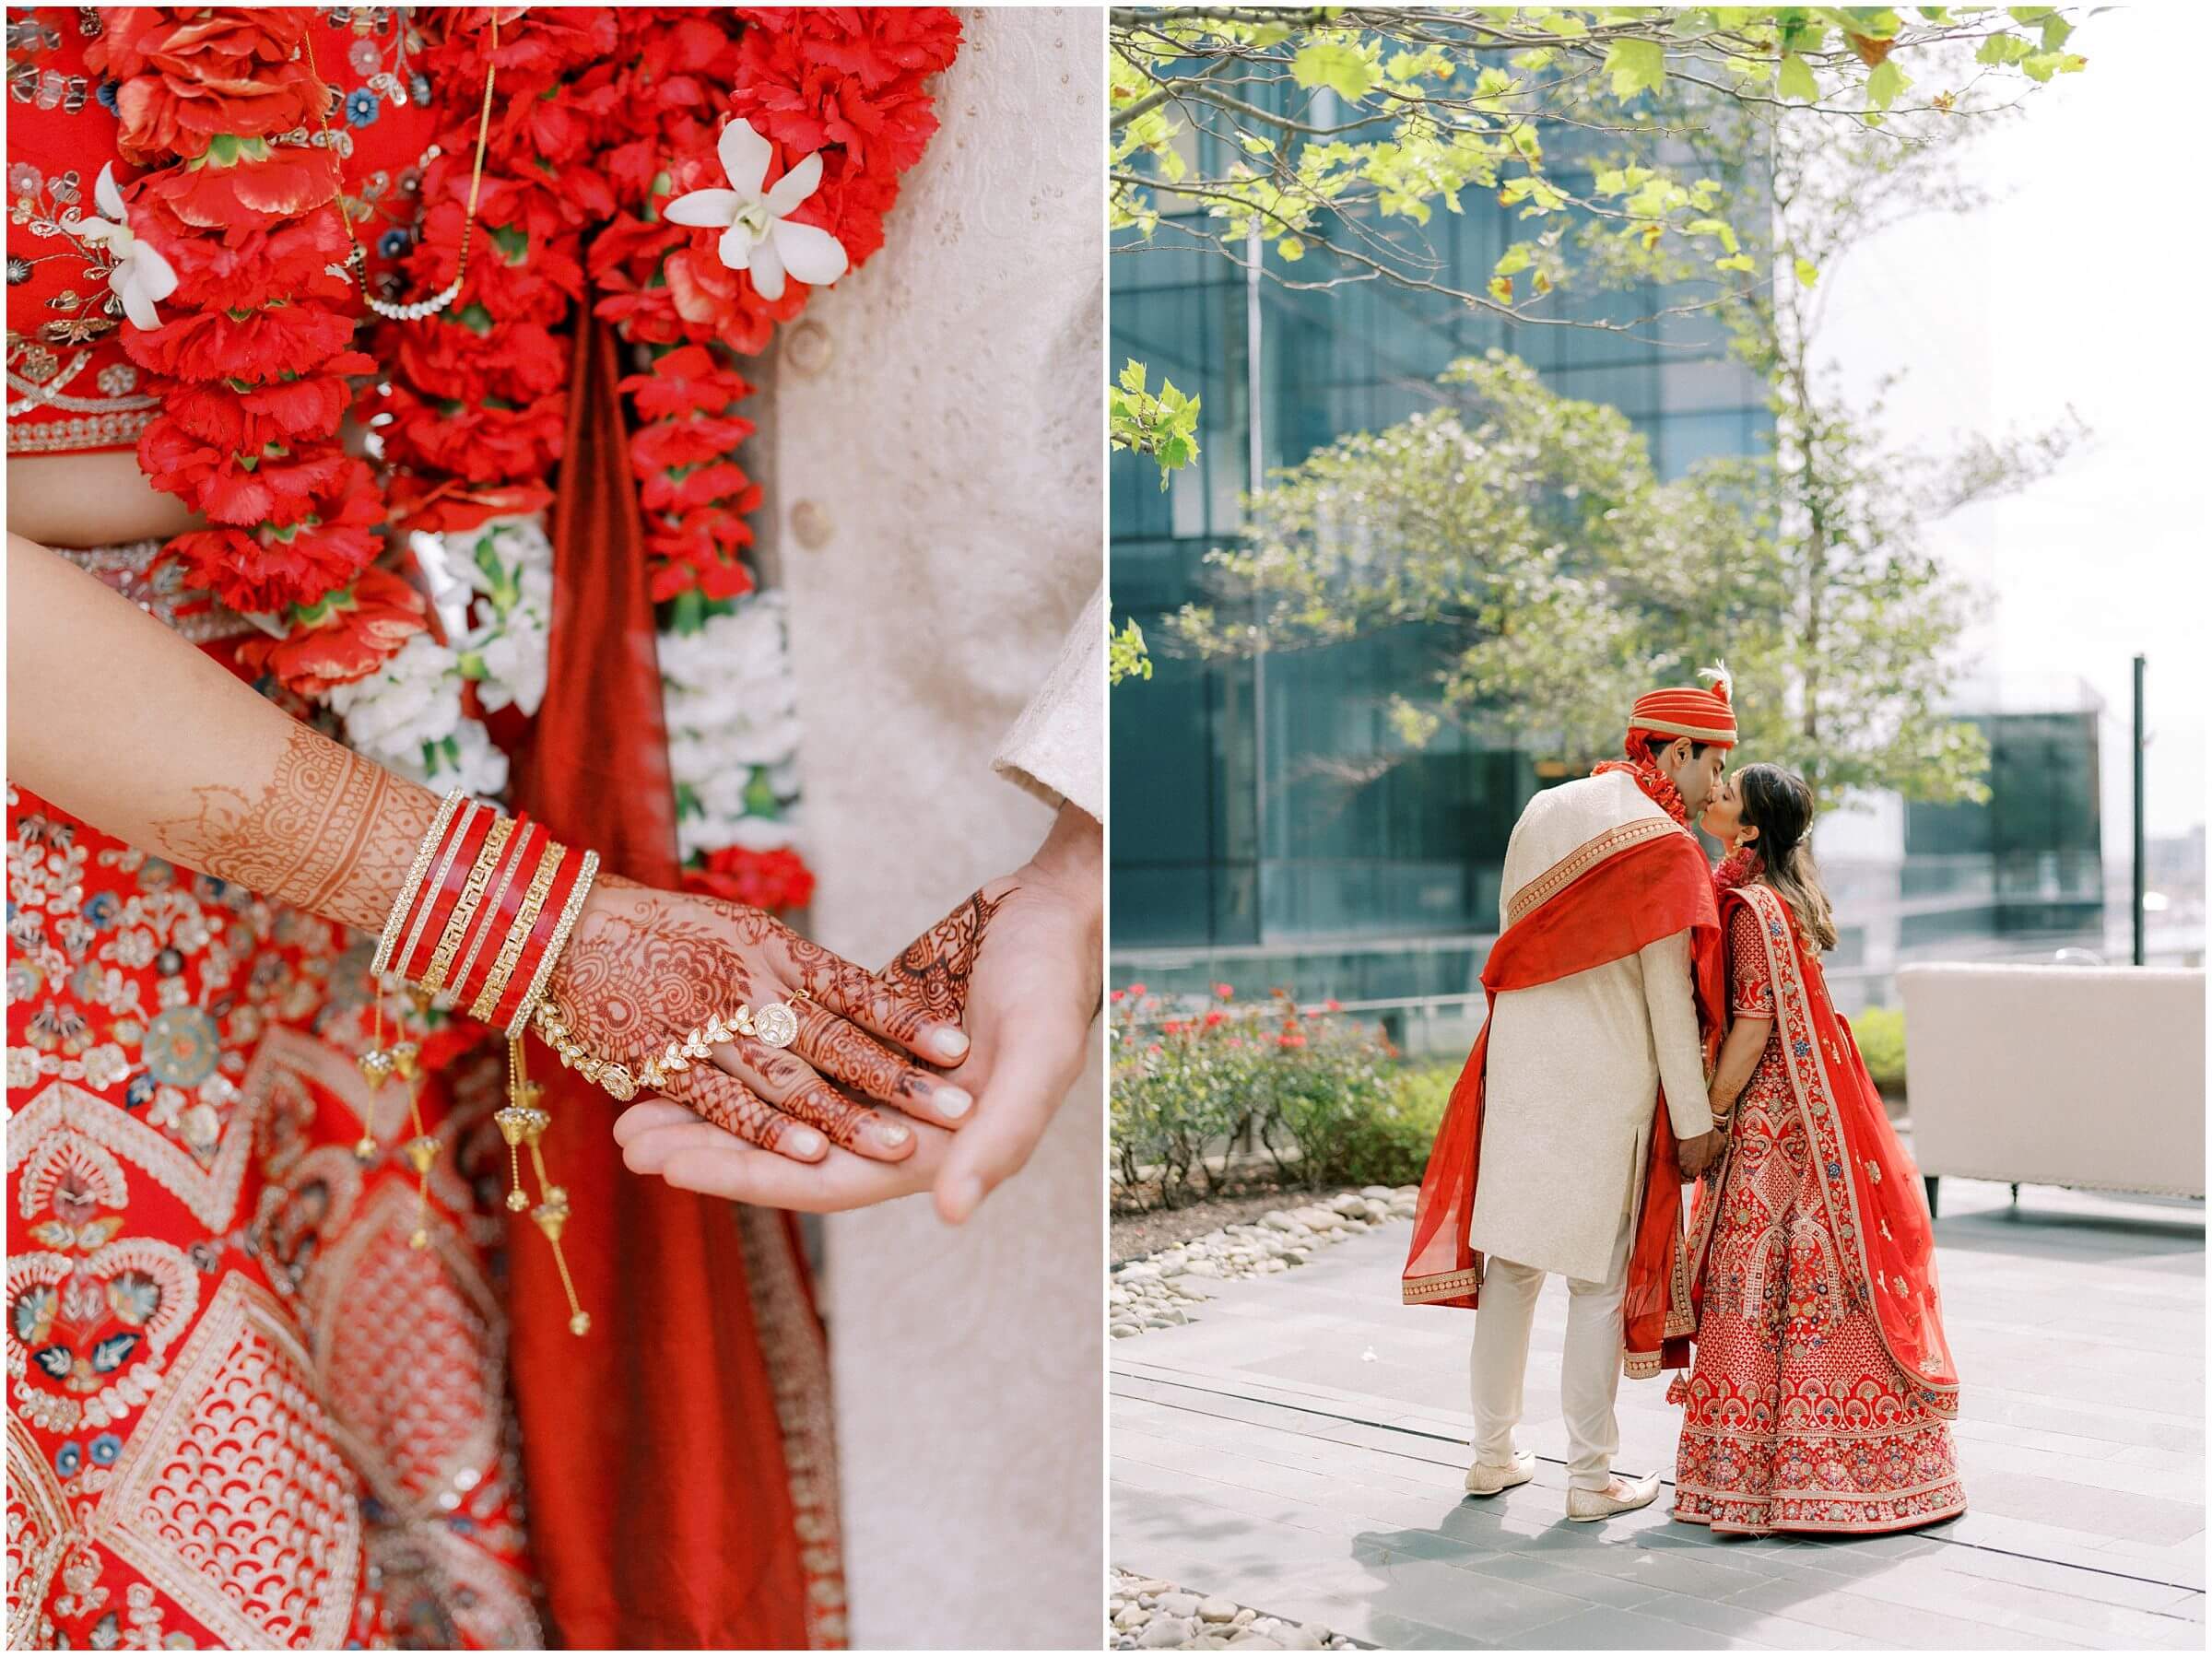 Hindu fusion wedding in Baltimore, MD. Photographed by luxury wedding photographer Winnie Dora Photography